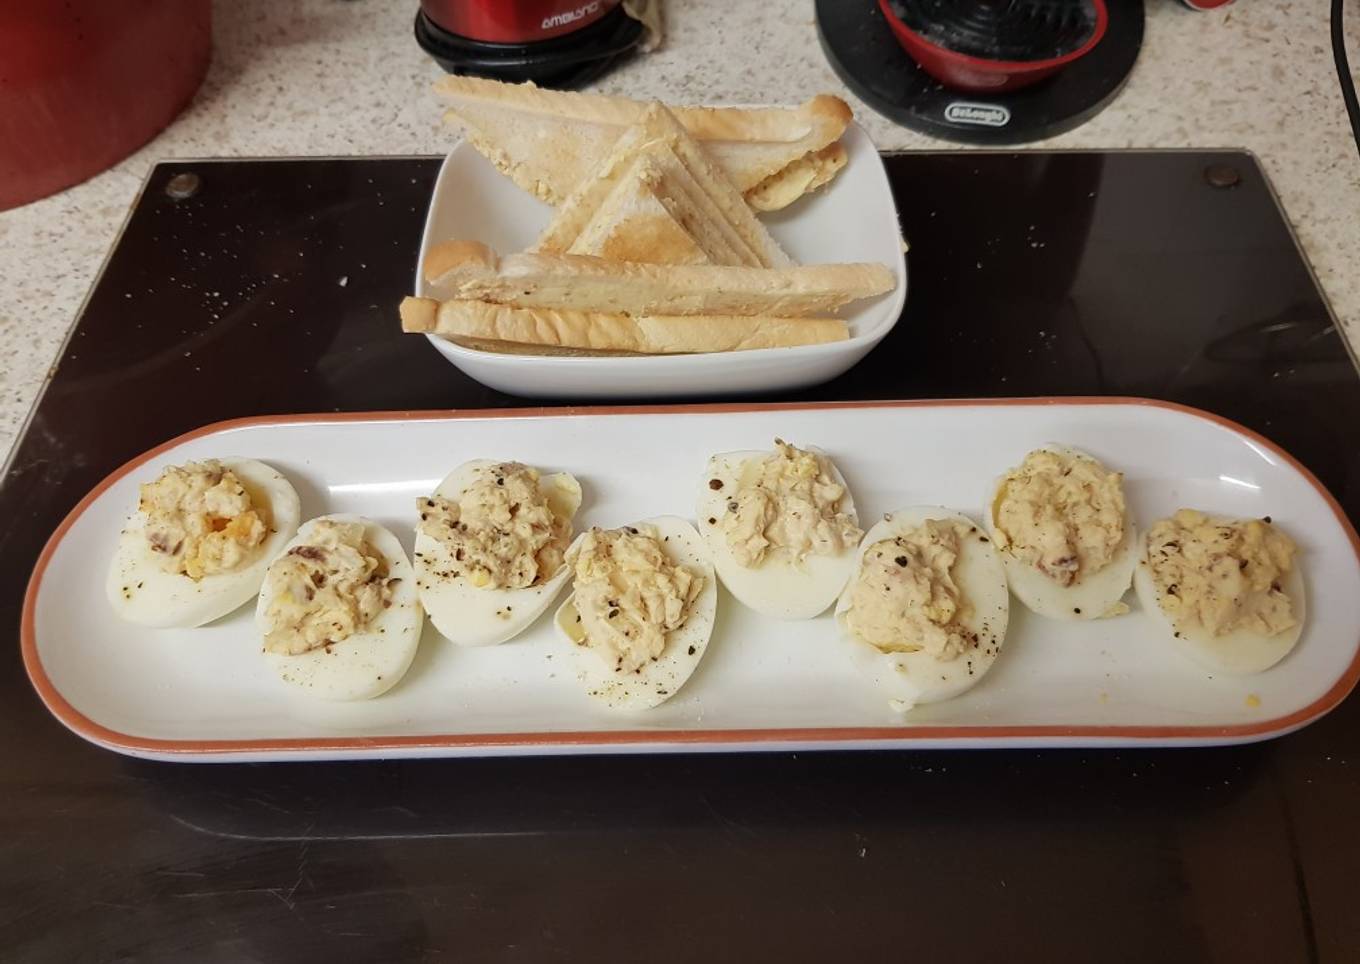 My Devilled Eggs.😀